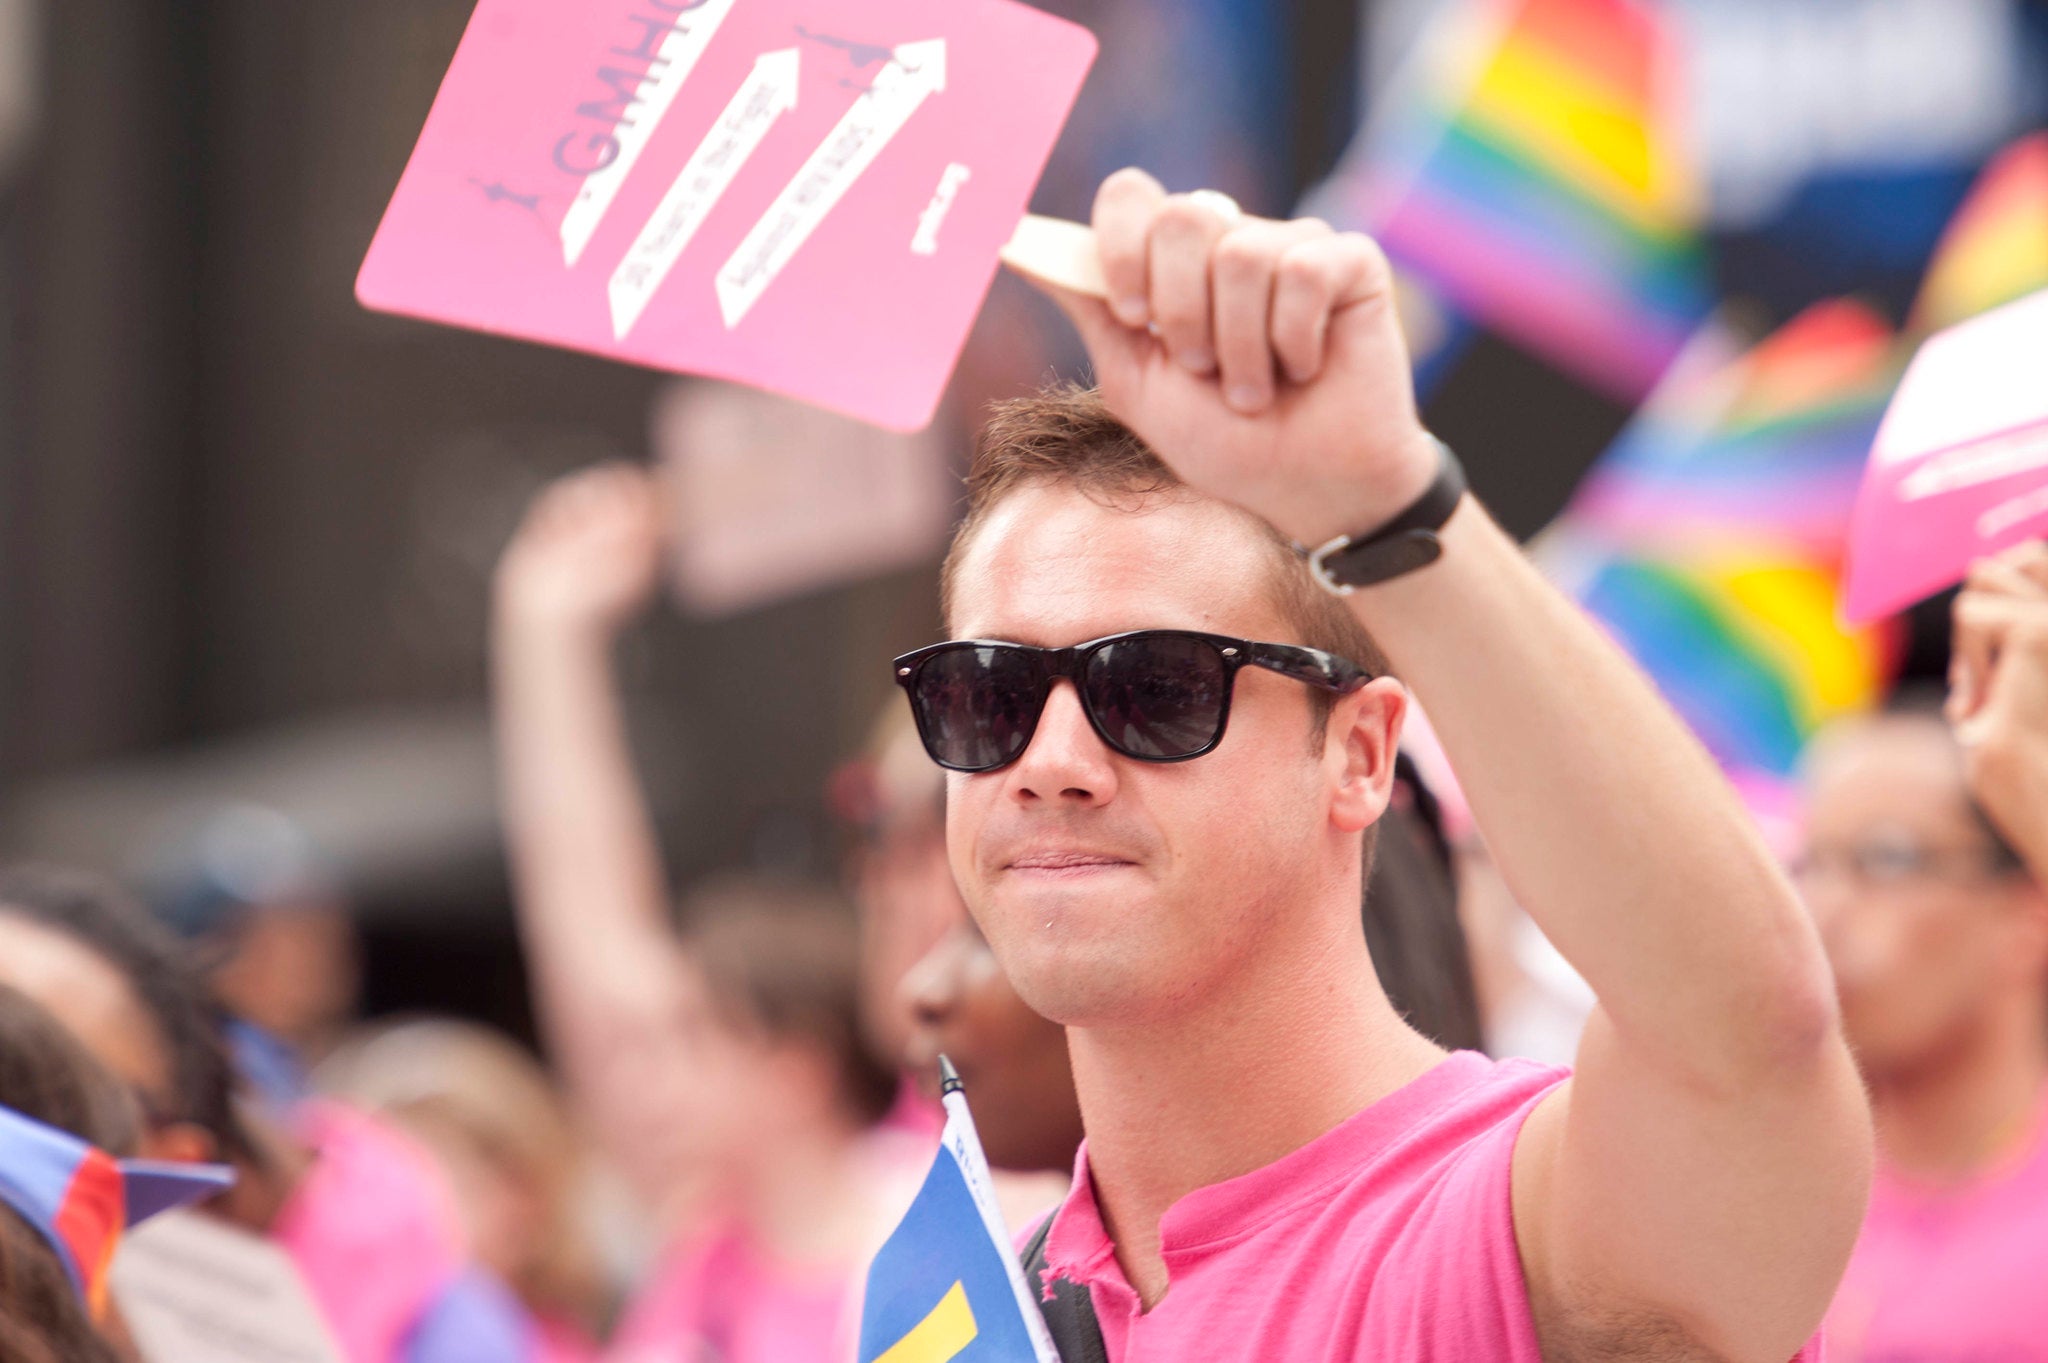 Man wearing sunglasses, a pink t-shirt and holding a pink sign. On the background, numberous rainbow flags